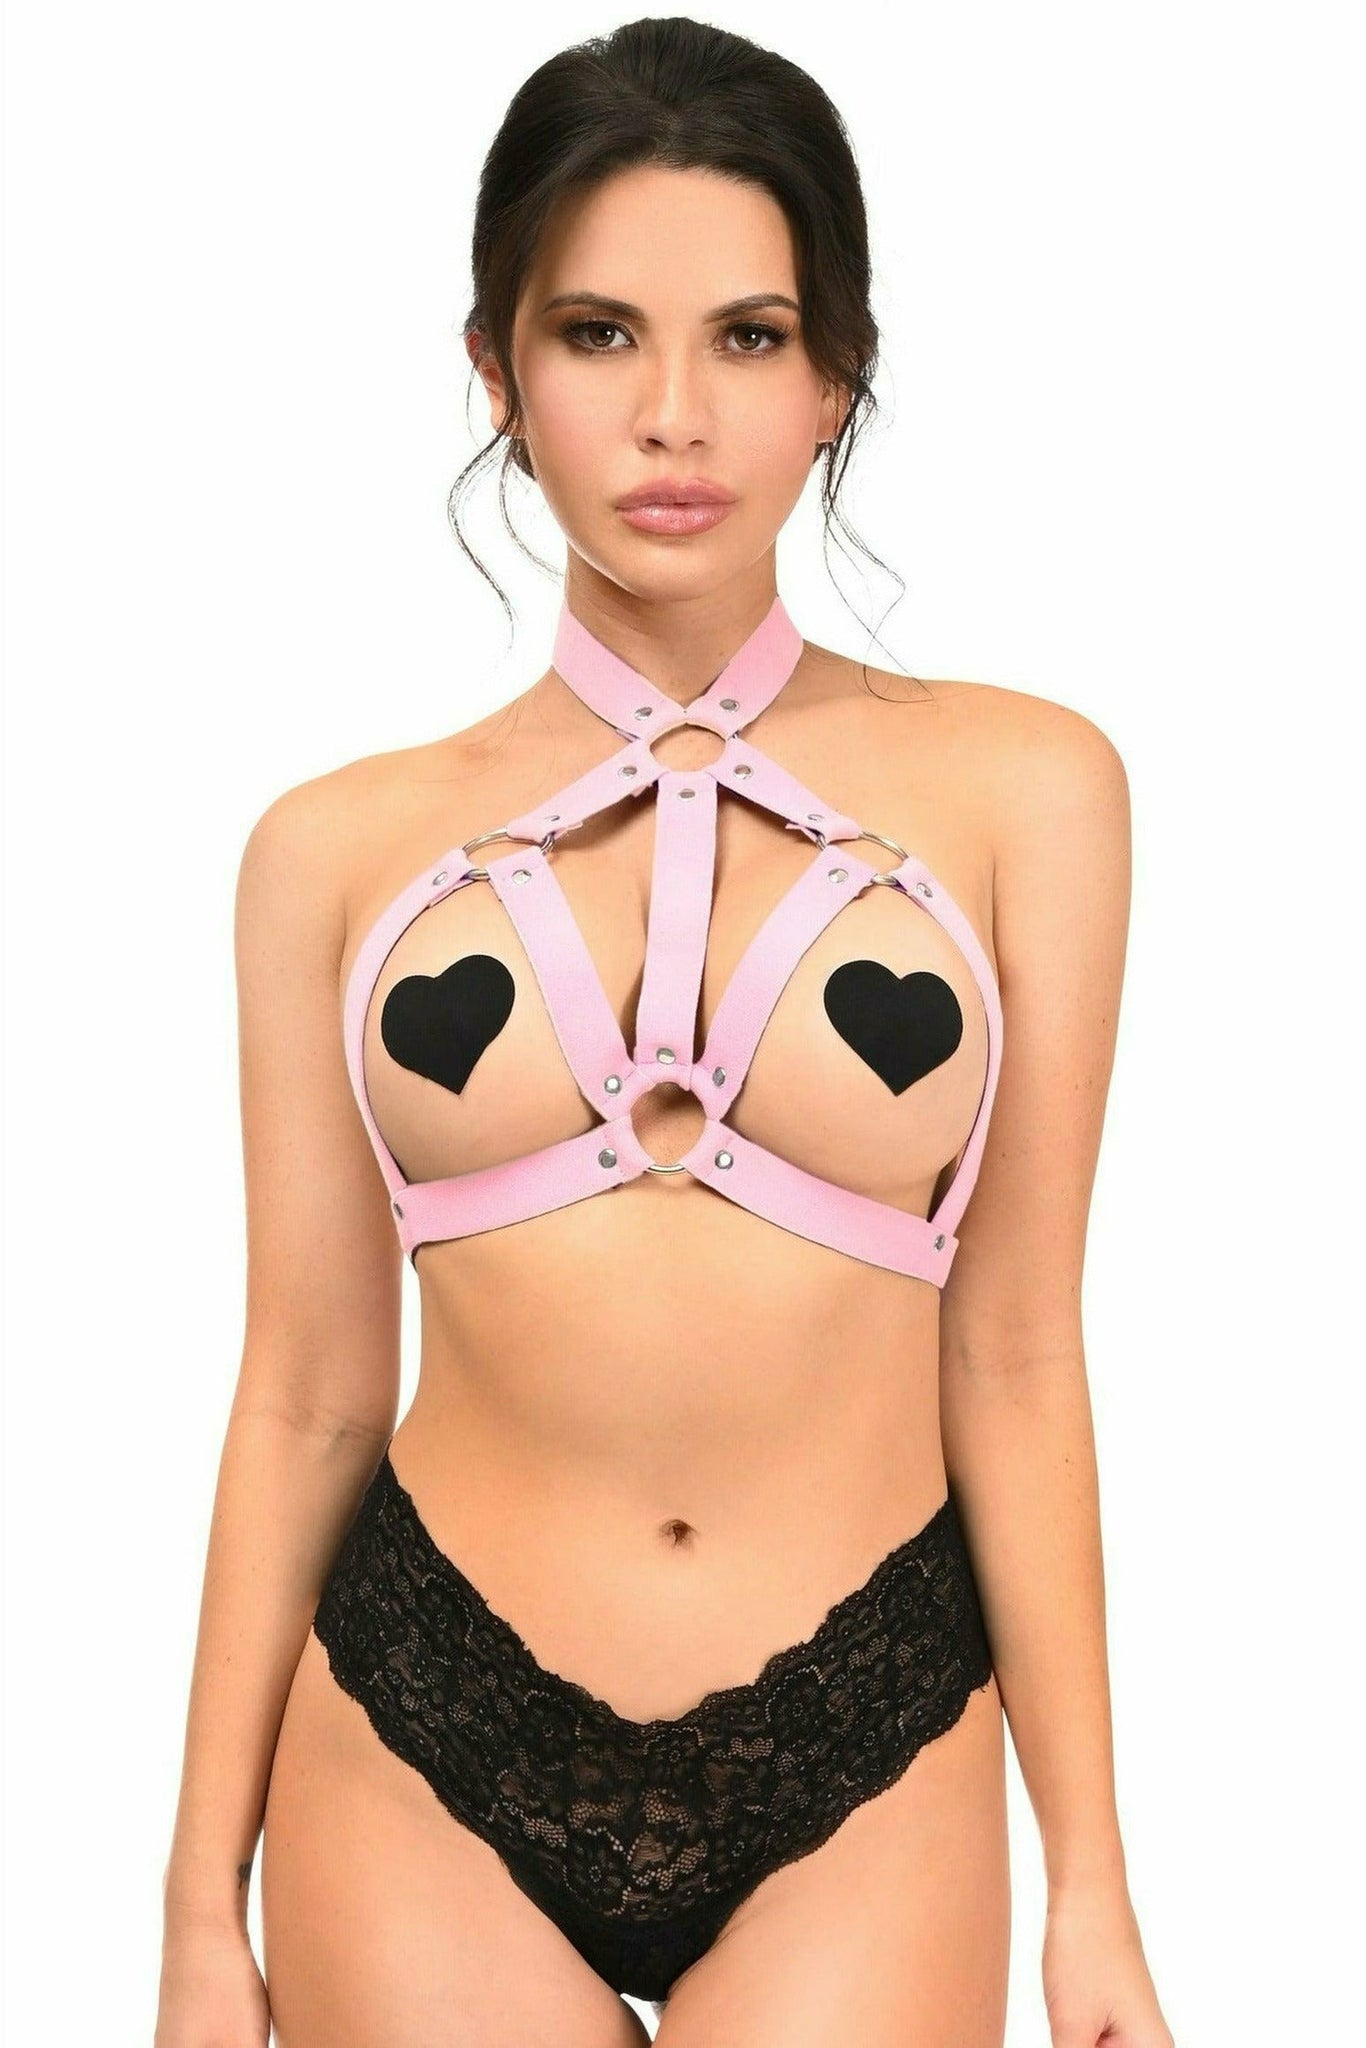 Stretchy Body Harness with Silver Hardware in Black or Light Pink